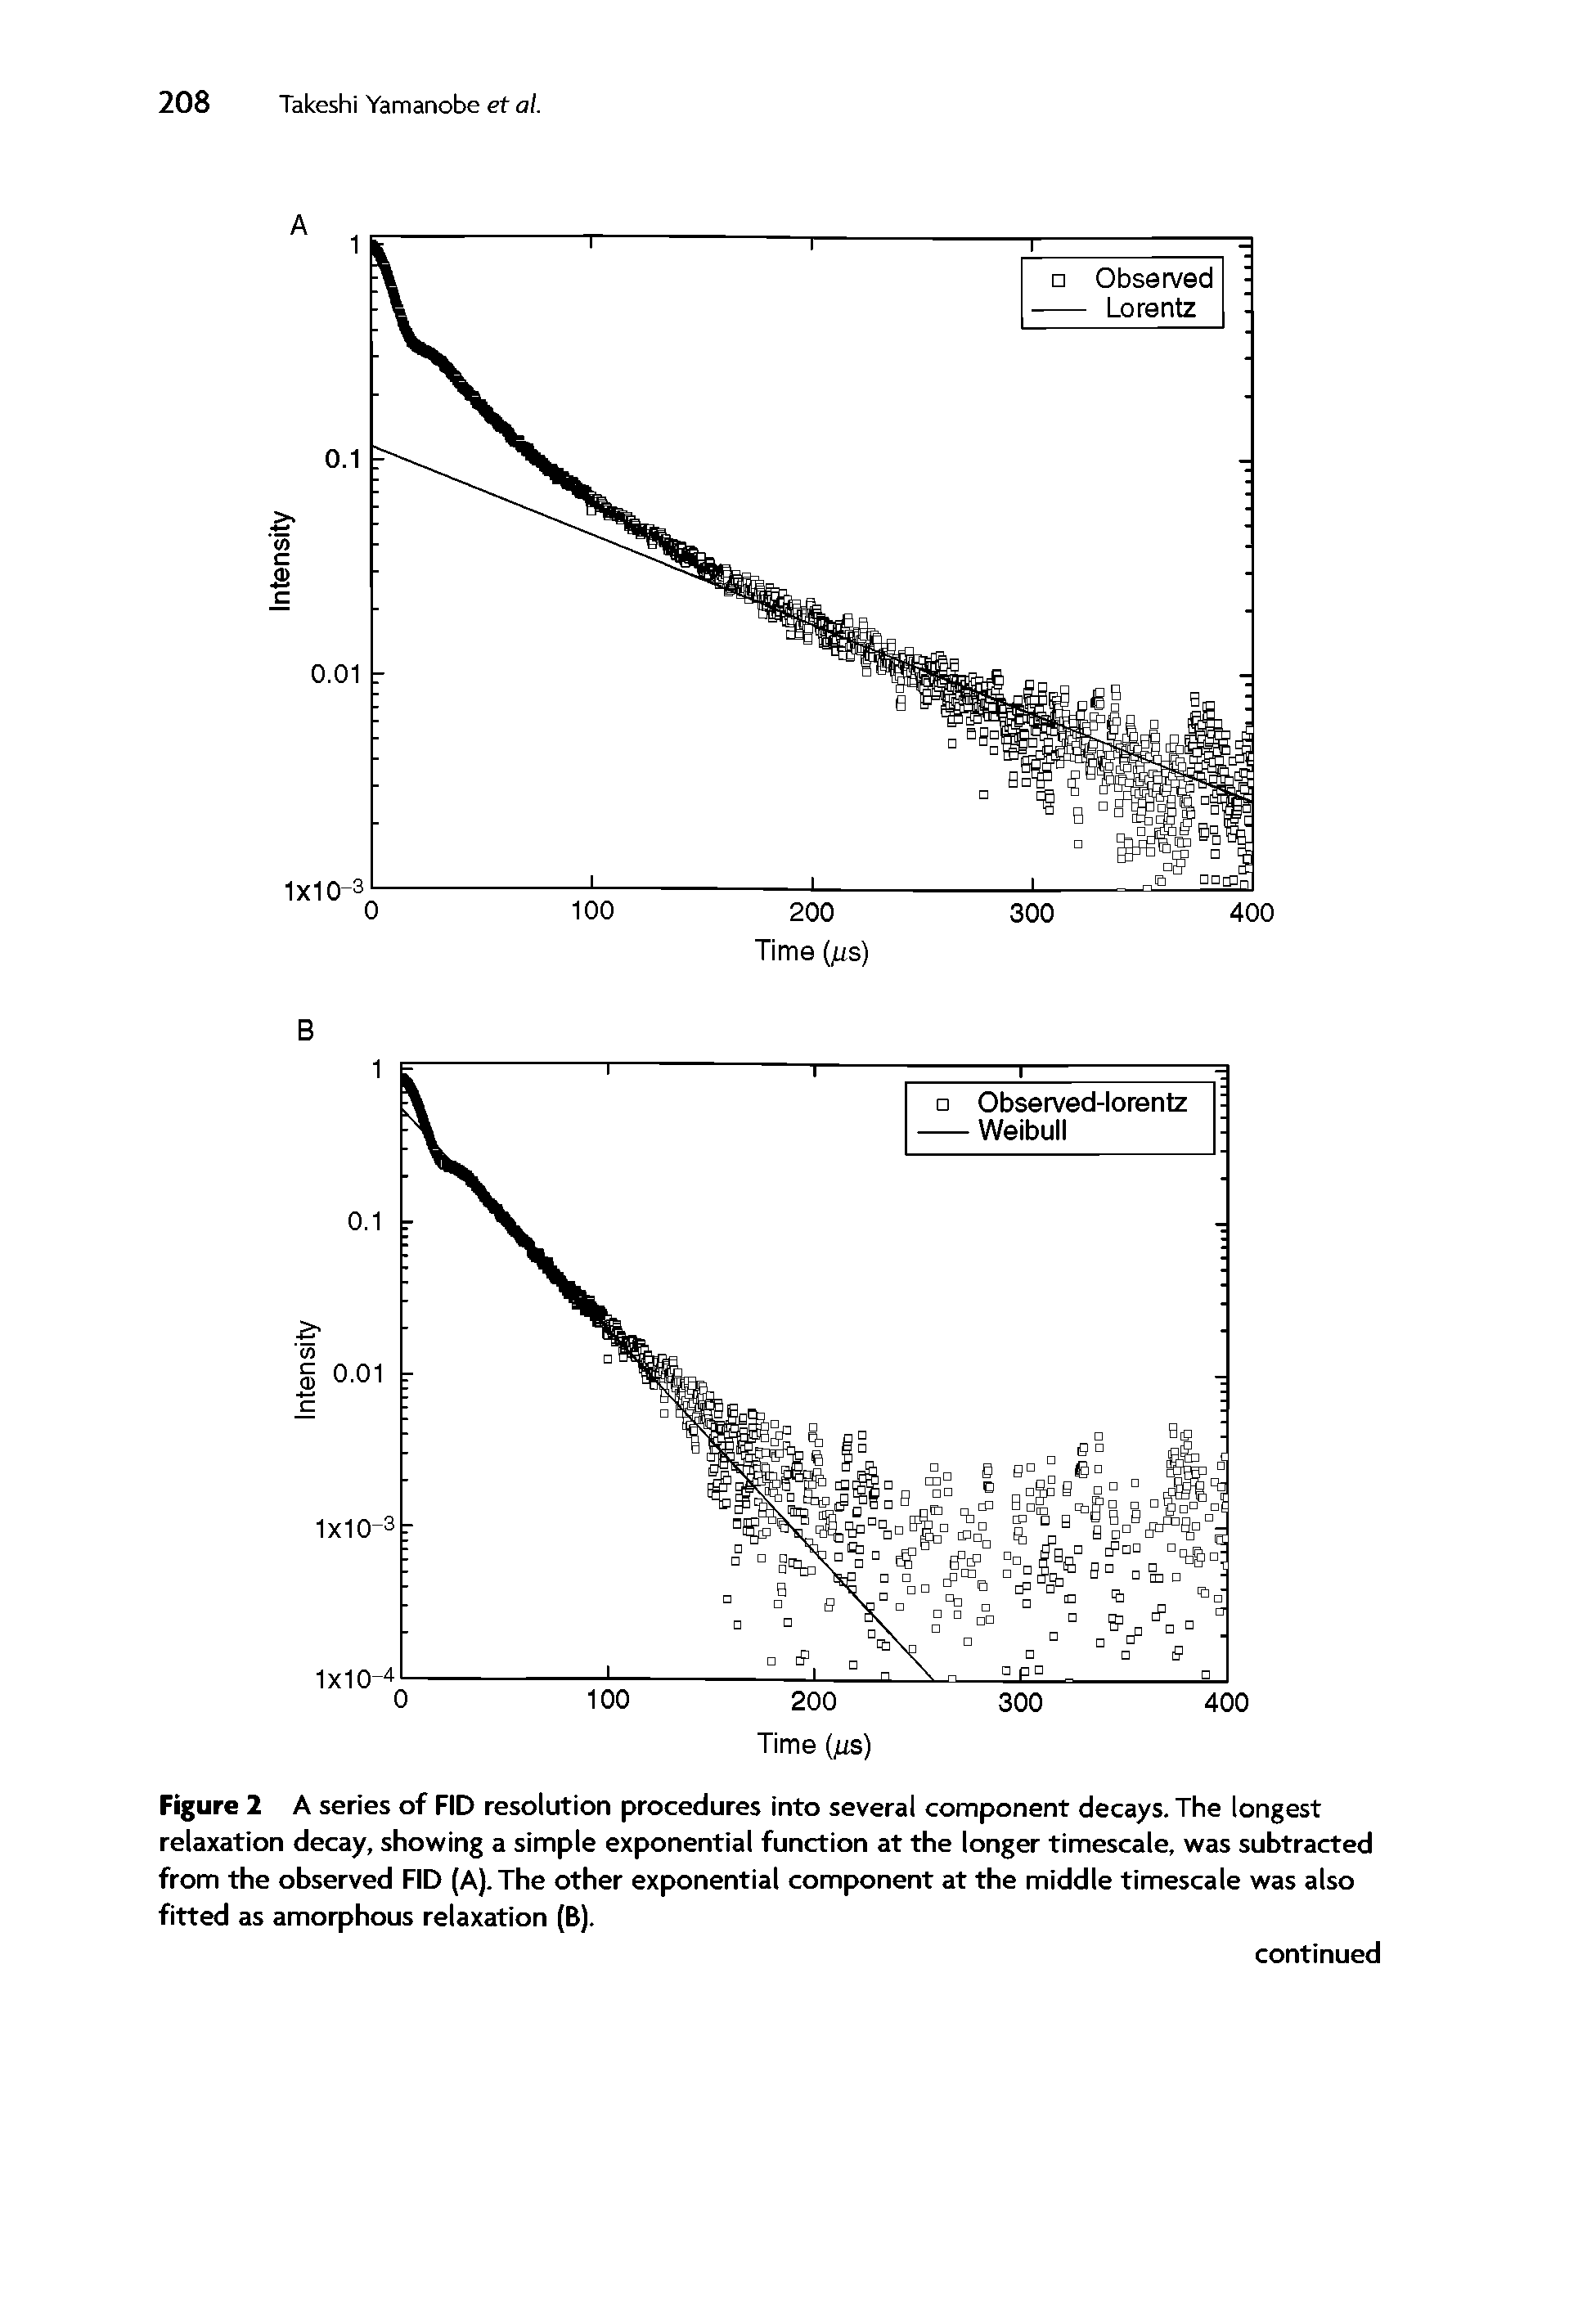 Figure 2 A series of FID resolution procedures into several component decays. The longest relaxation decay, showing a simple exponential function at the longer timescale, was subtracted from the observed FID (A). The other exponential component at the middle timescale was also fitted as amorphous relaxation (B).